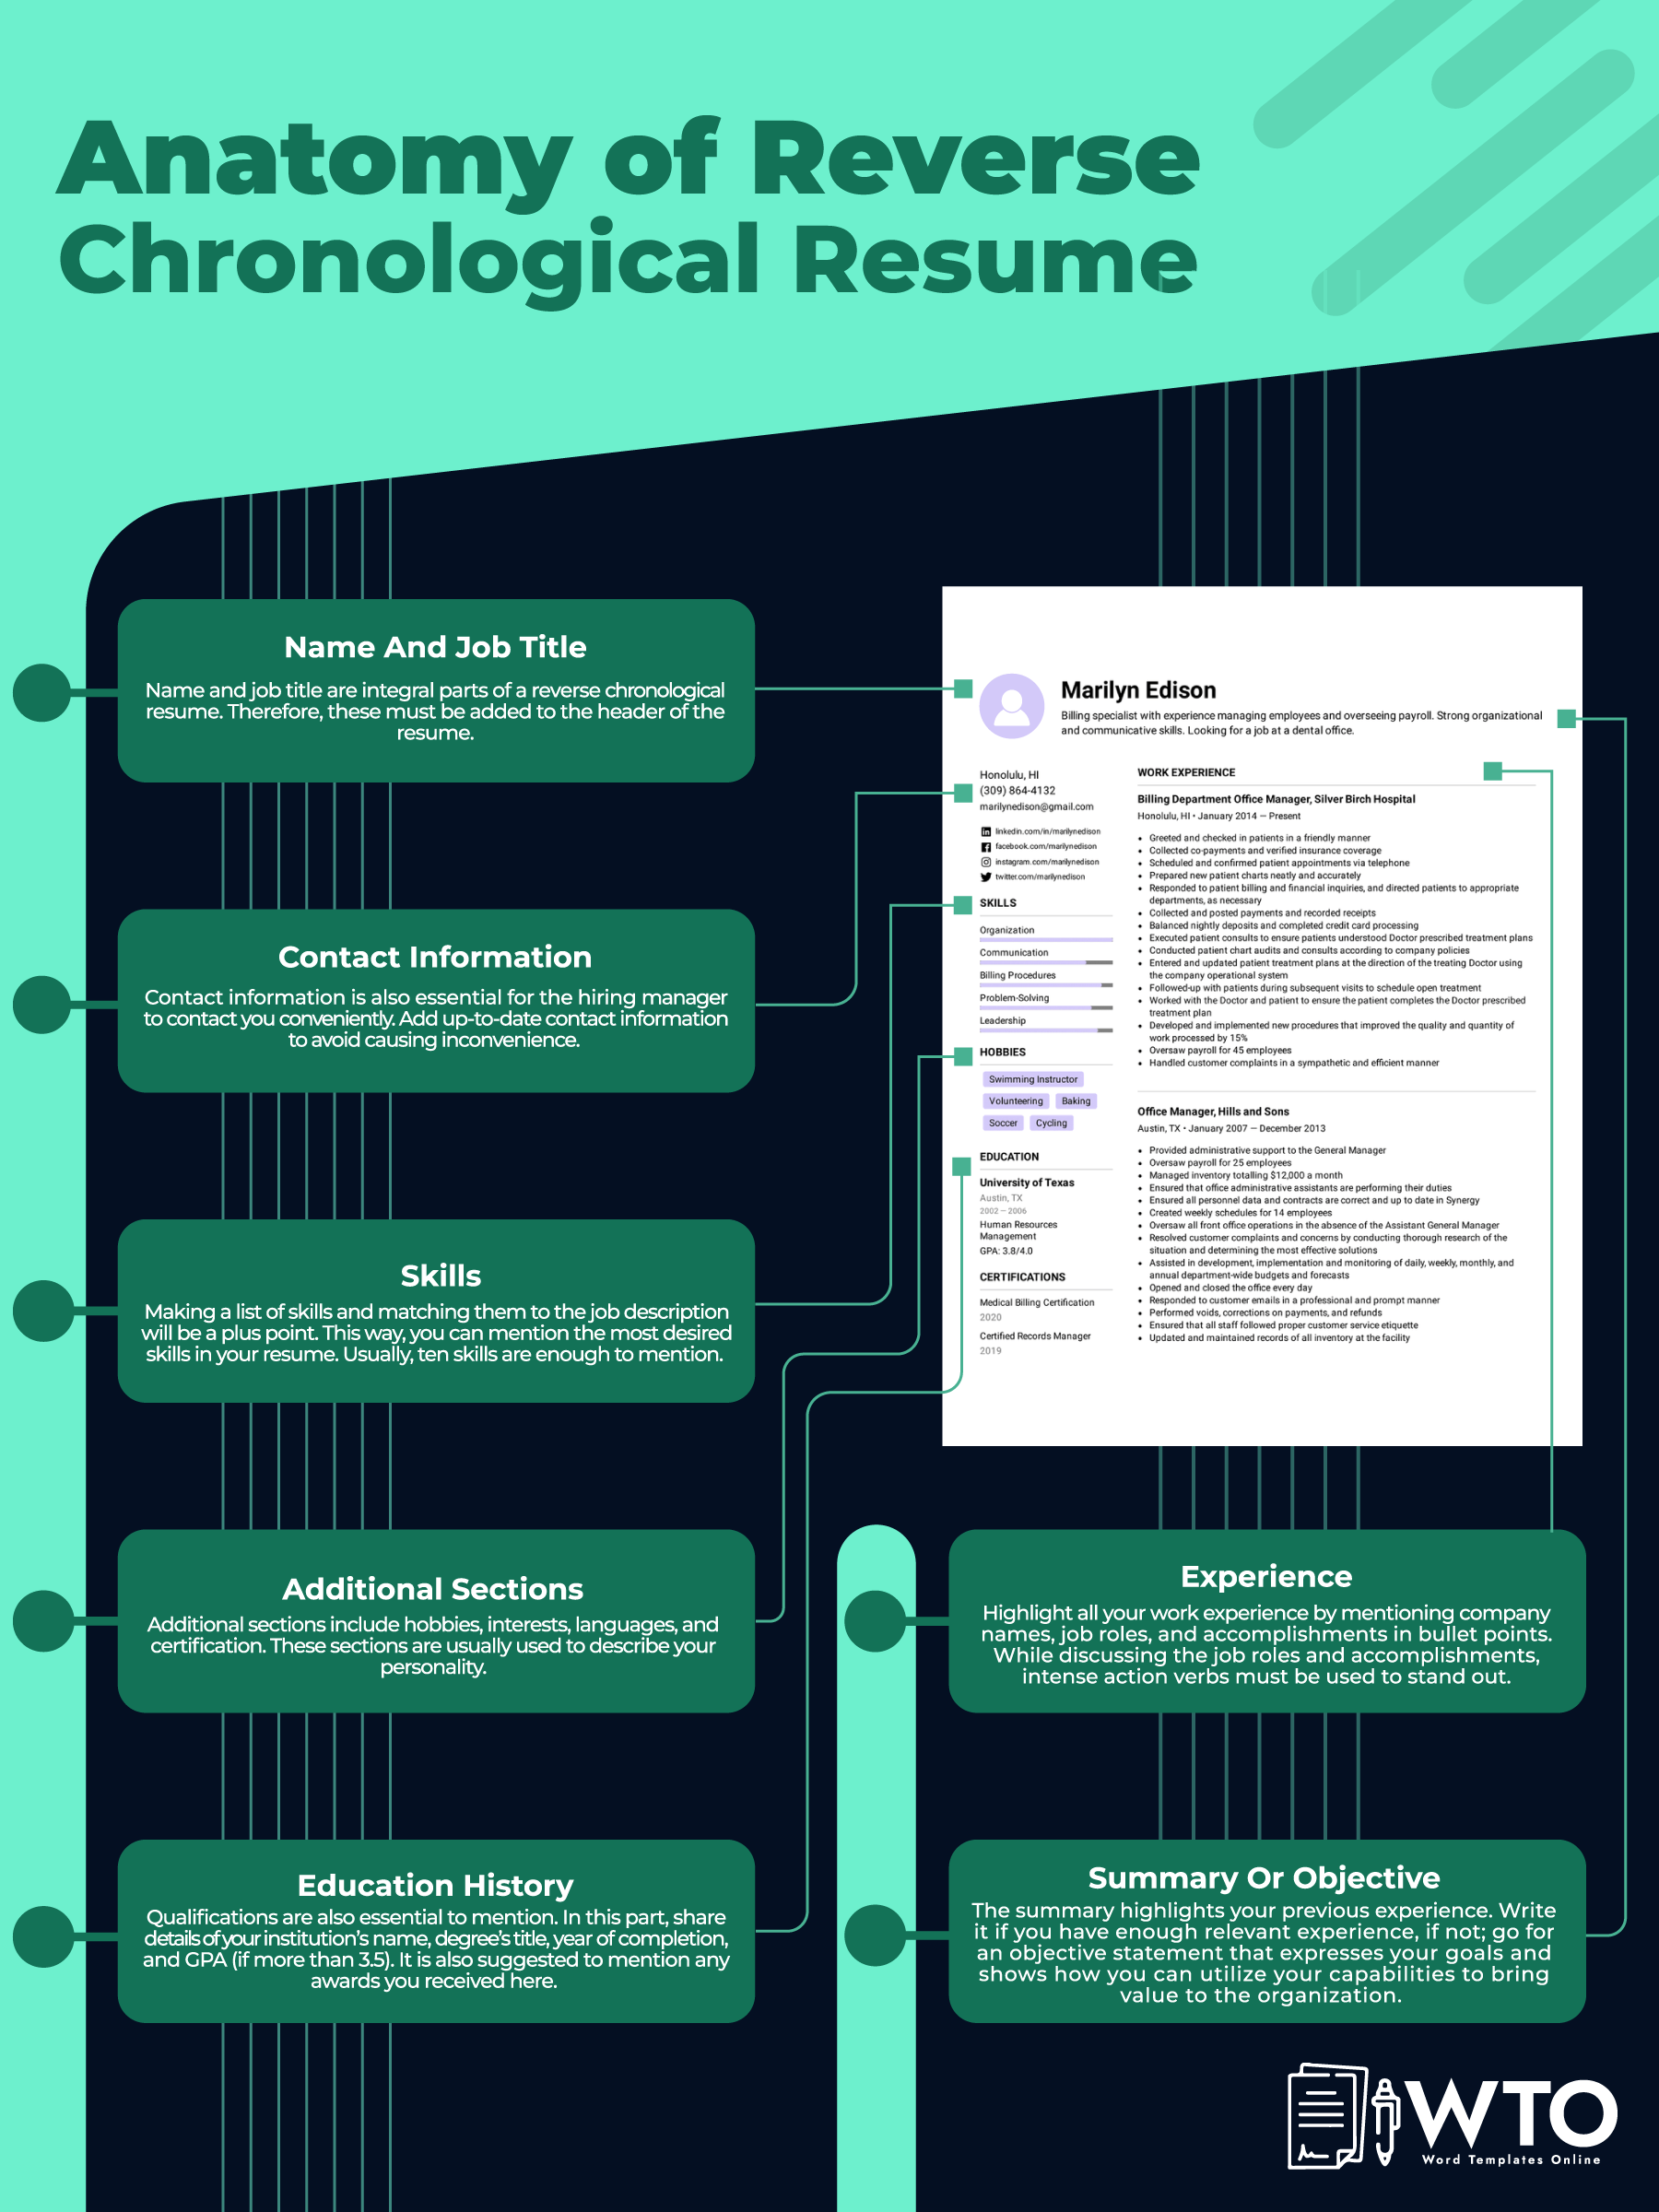 This infographic is about the anatomy of Reverse Chronological Resume.